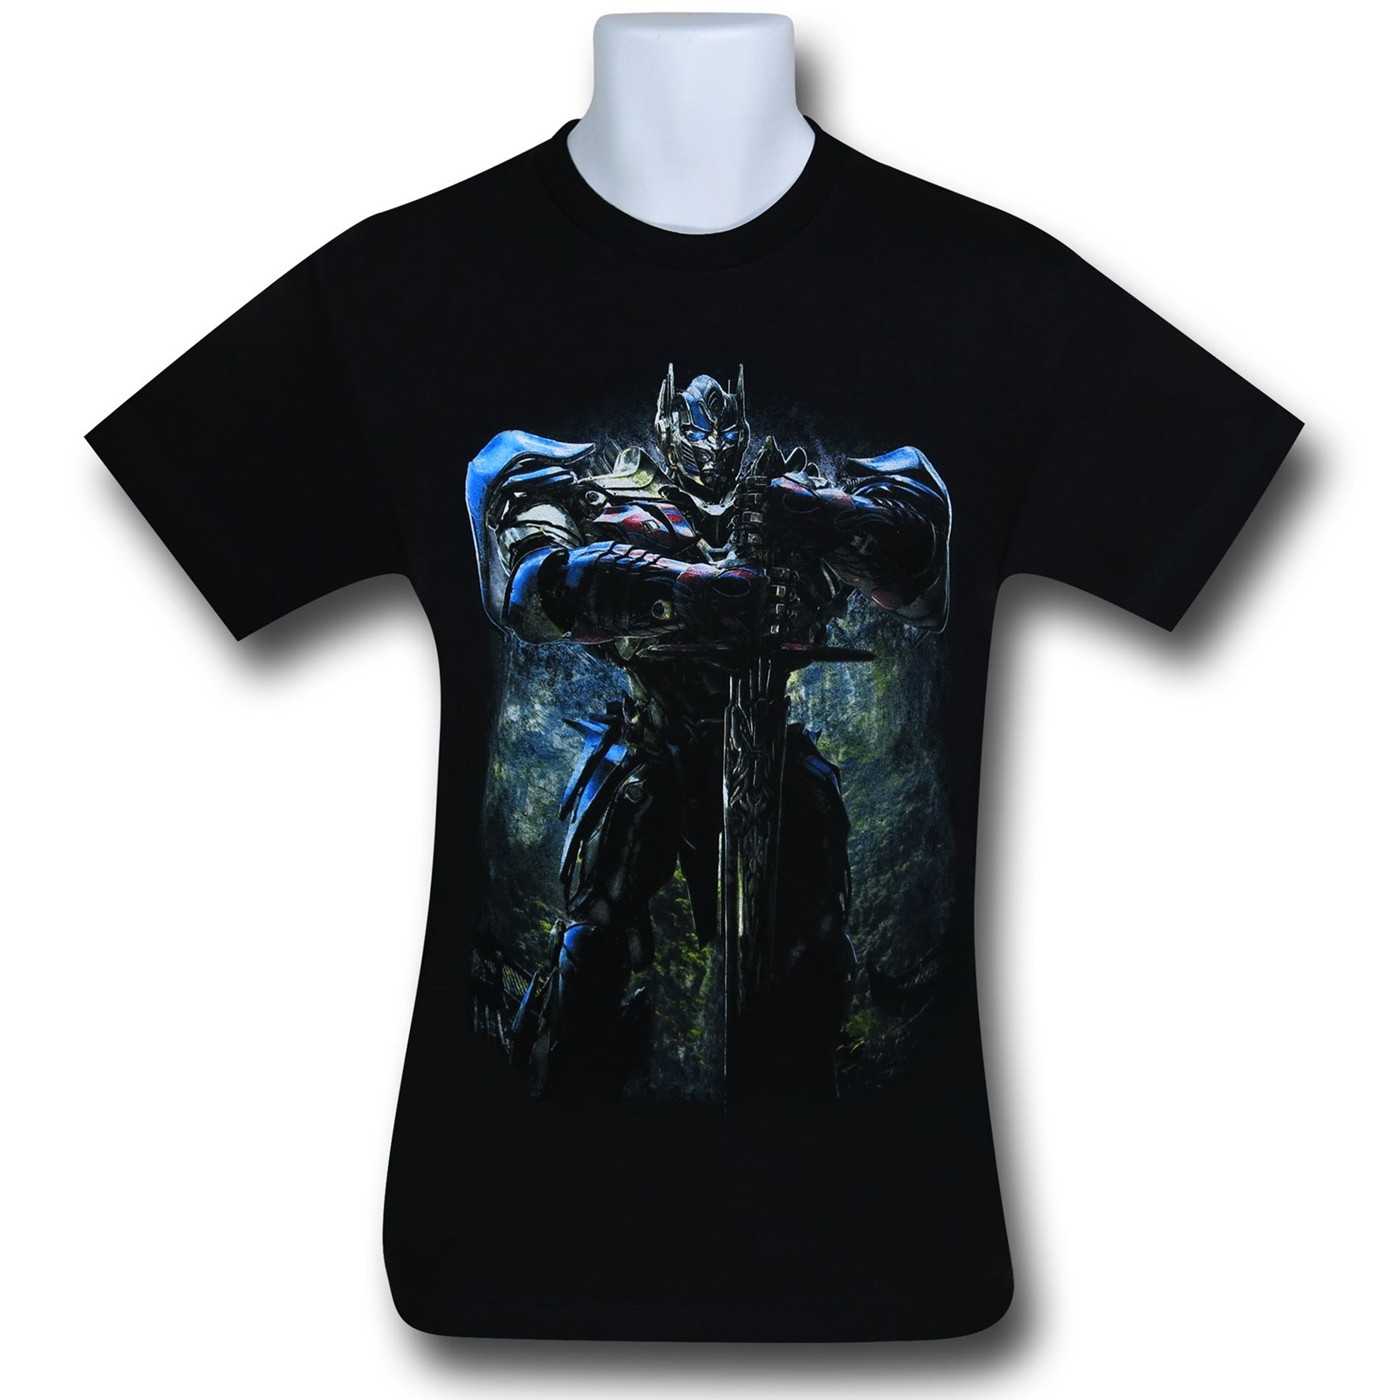 Transformers 4 Optimus Prime With Sword T-Shirt